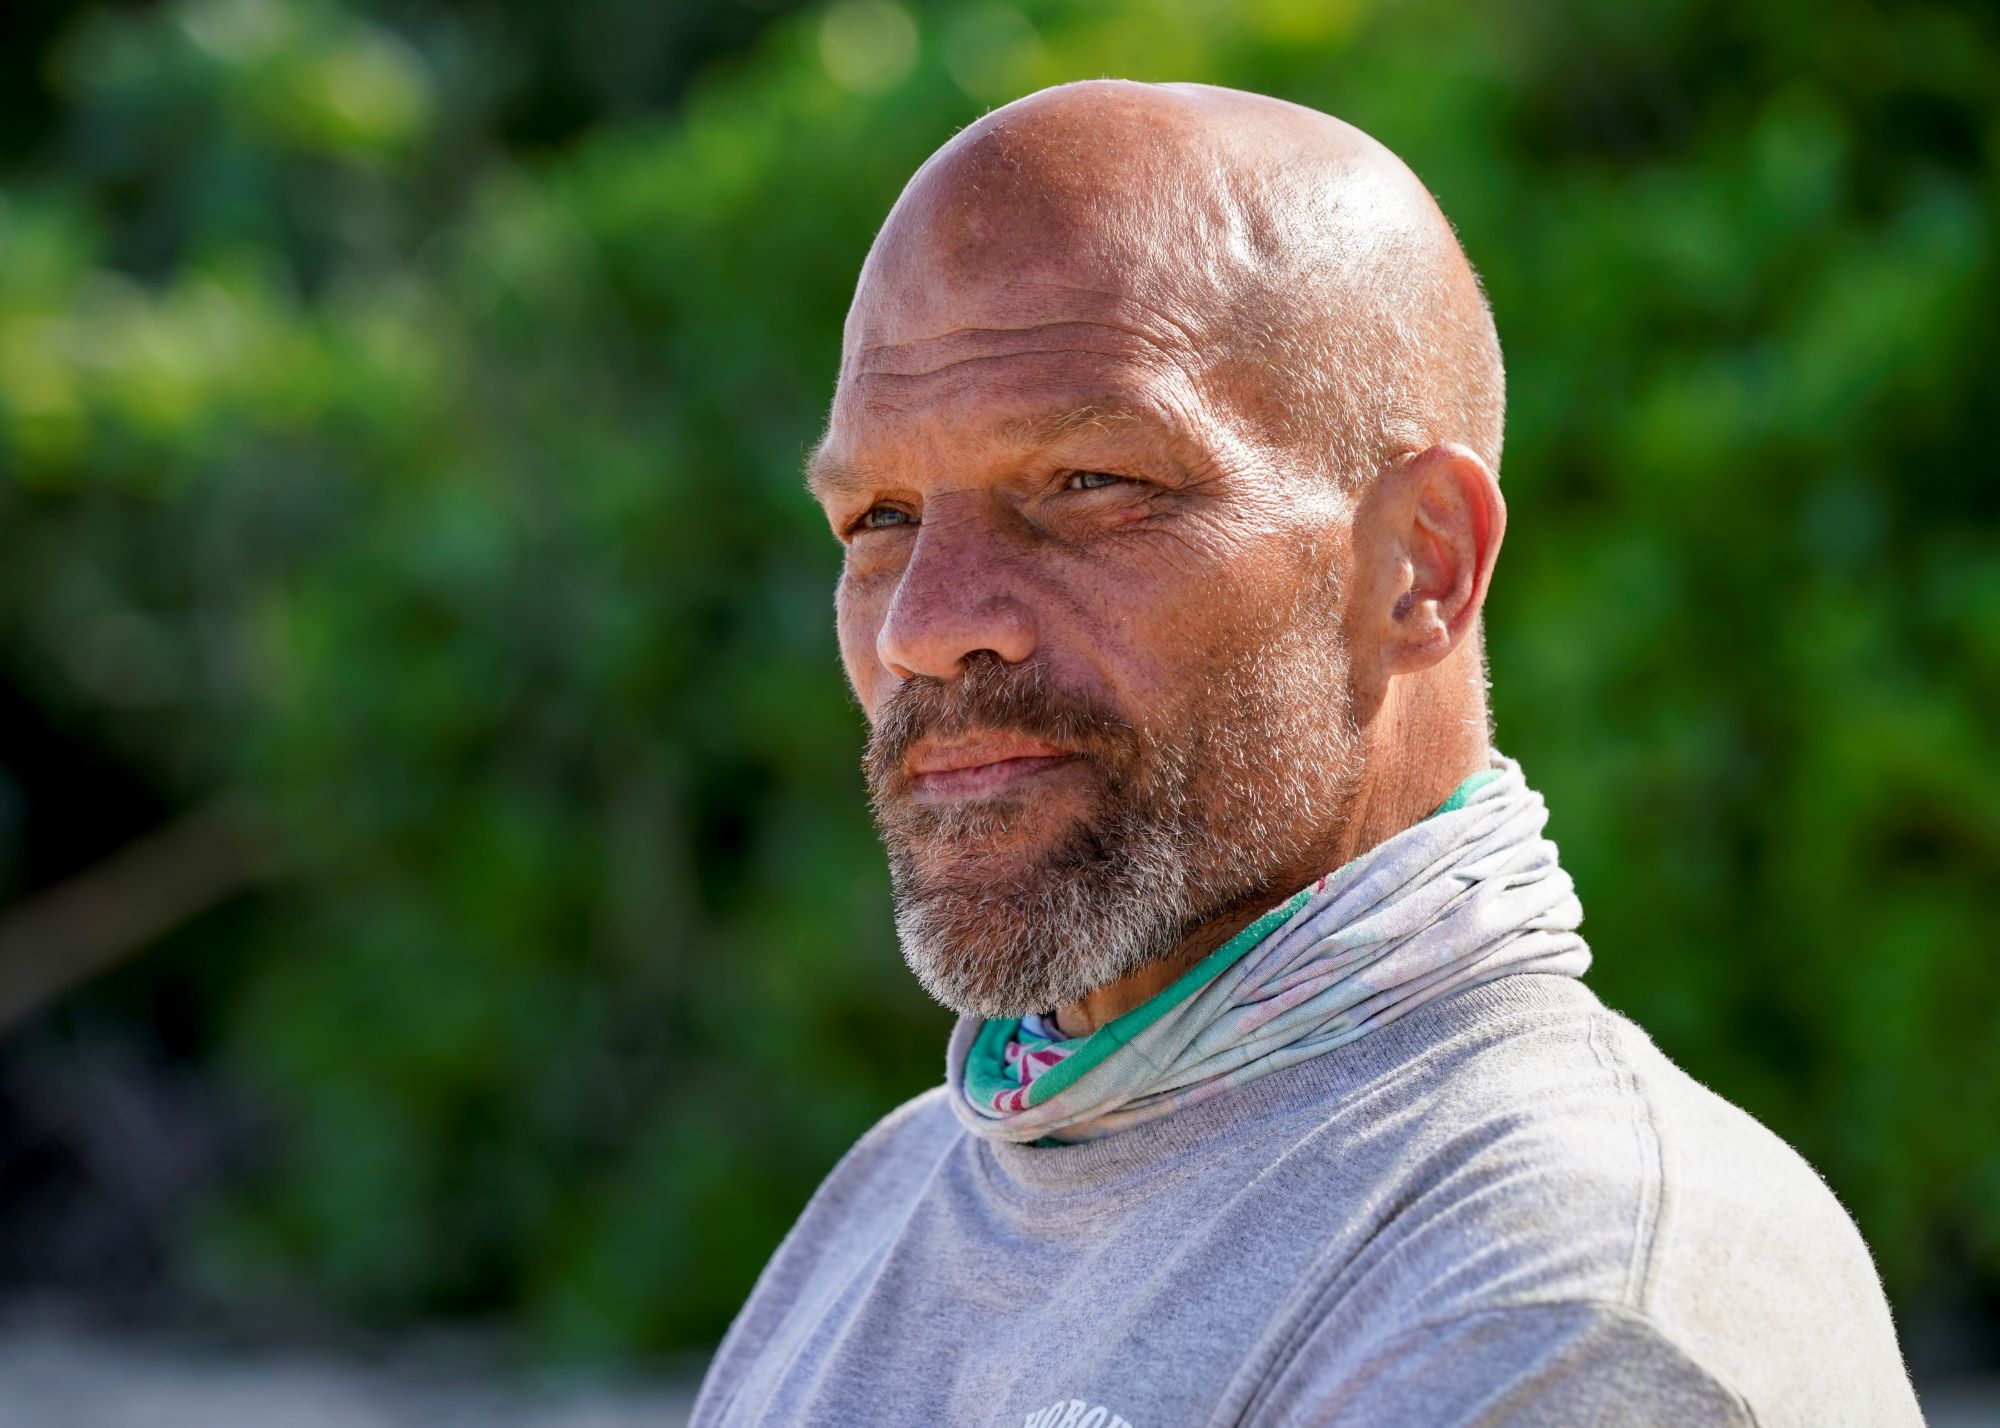 'Survivor' Season 42 castaway Mike Turner wears a gray shirt and his green buff around his neck.